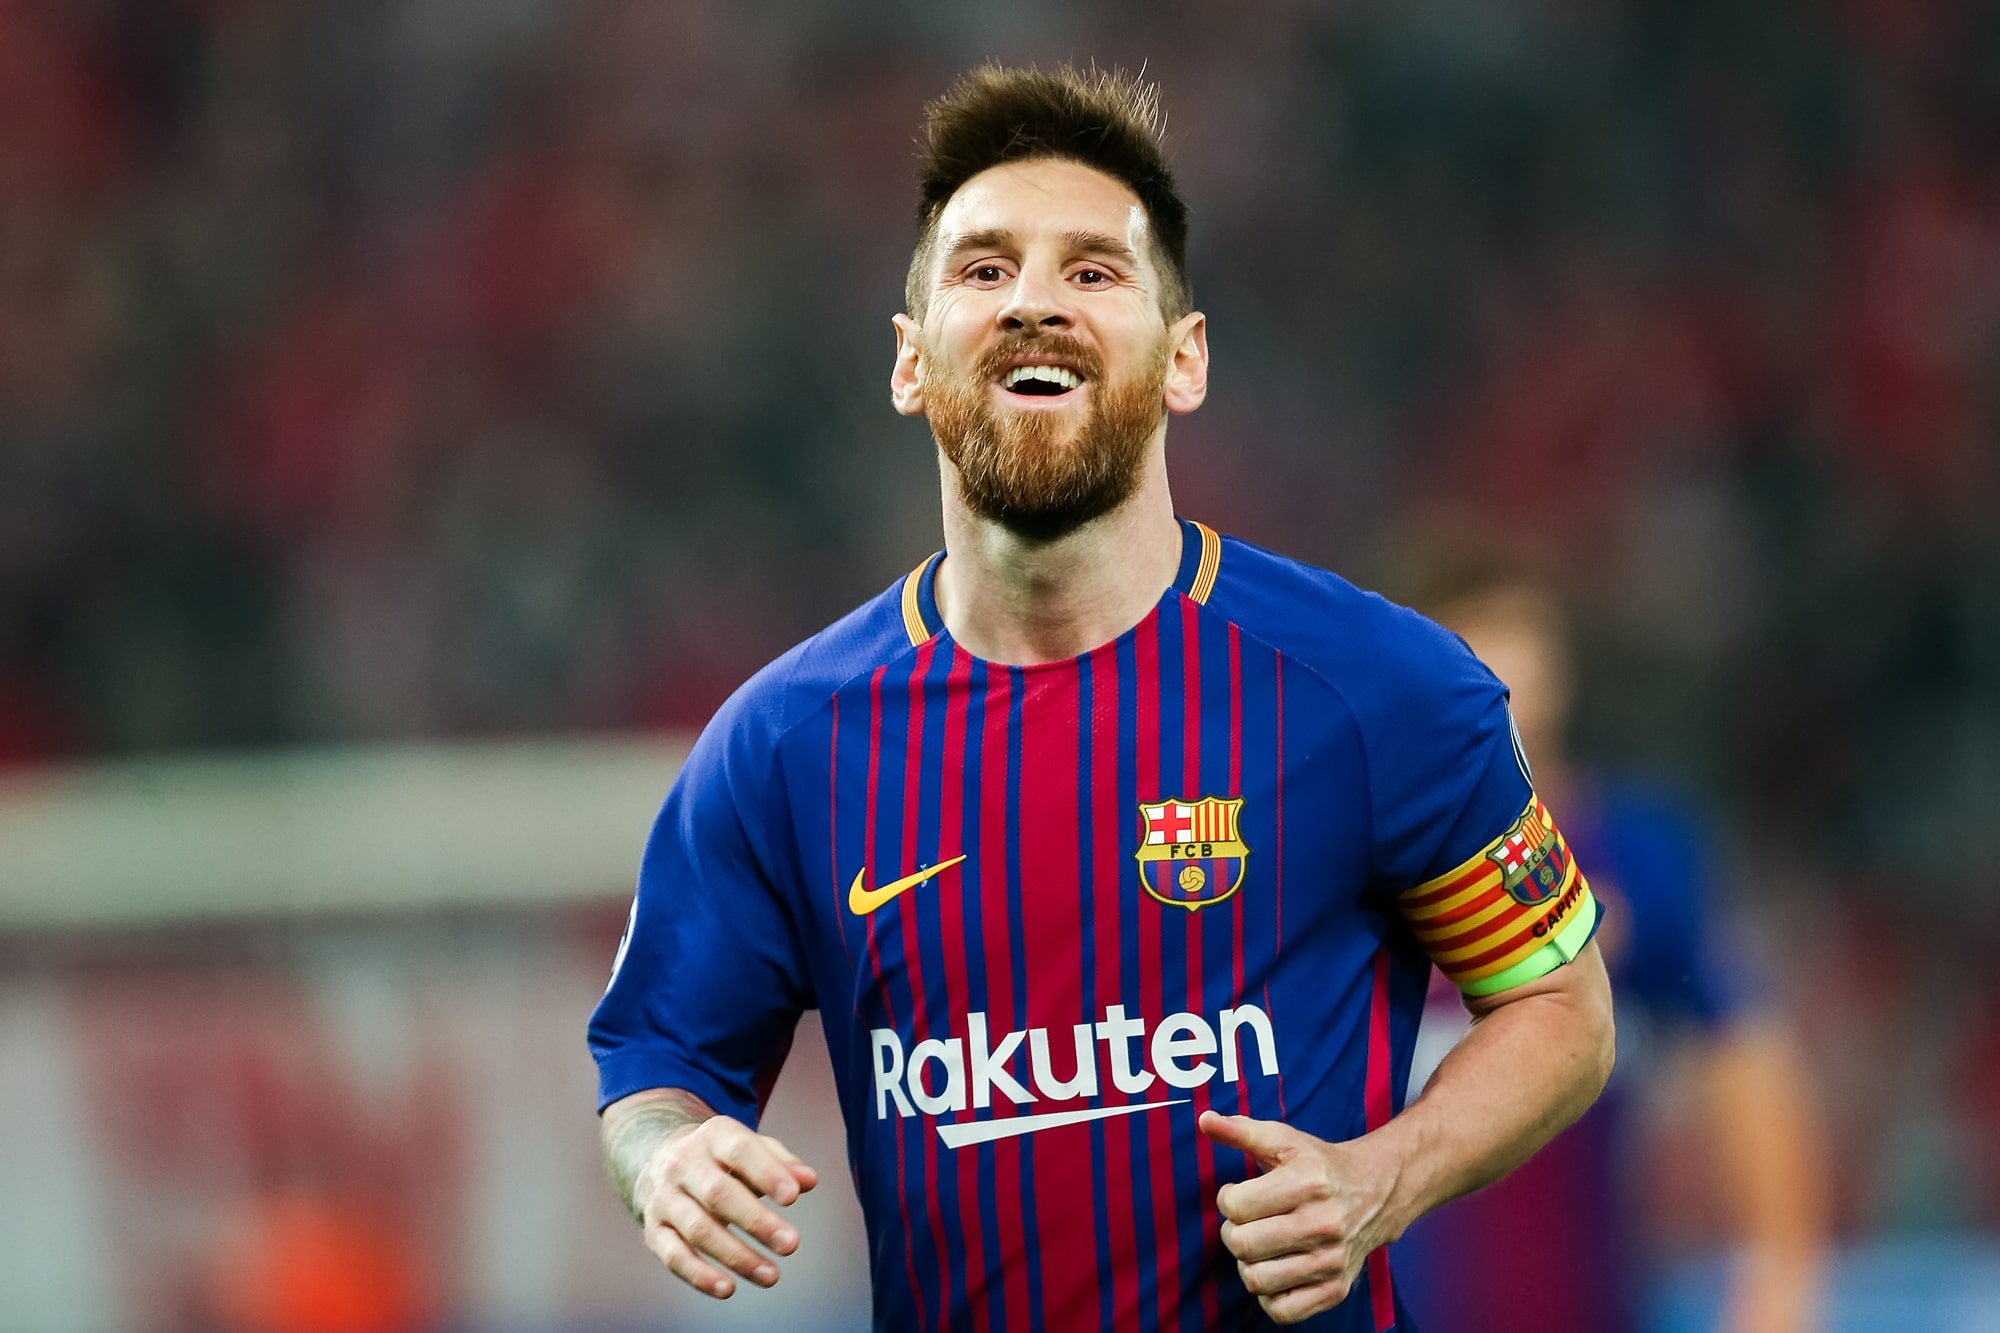 Messi’s PSG contract reportedly includes crypto fan tokens